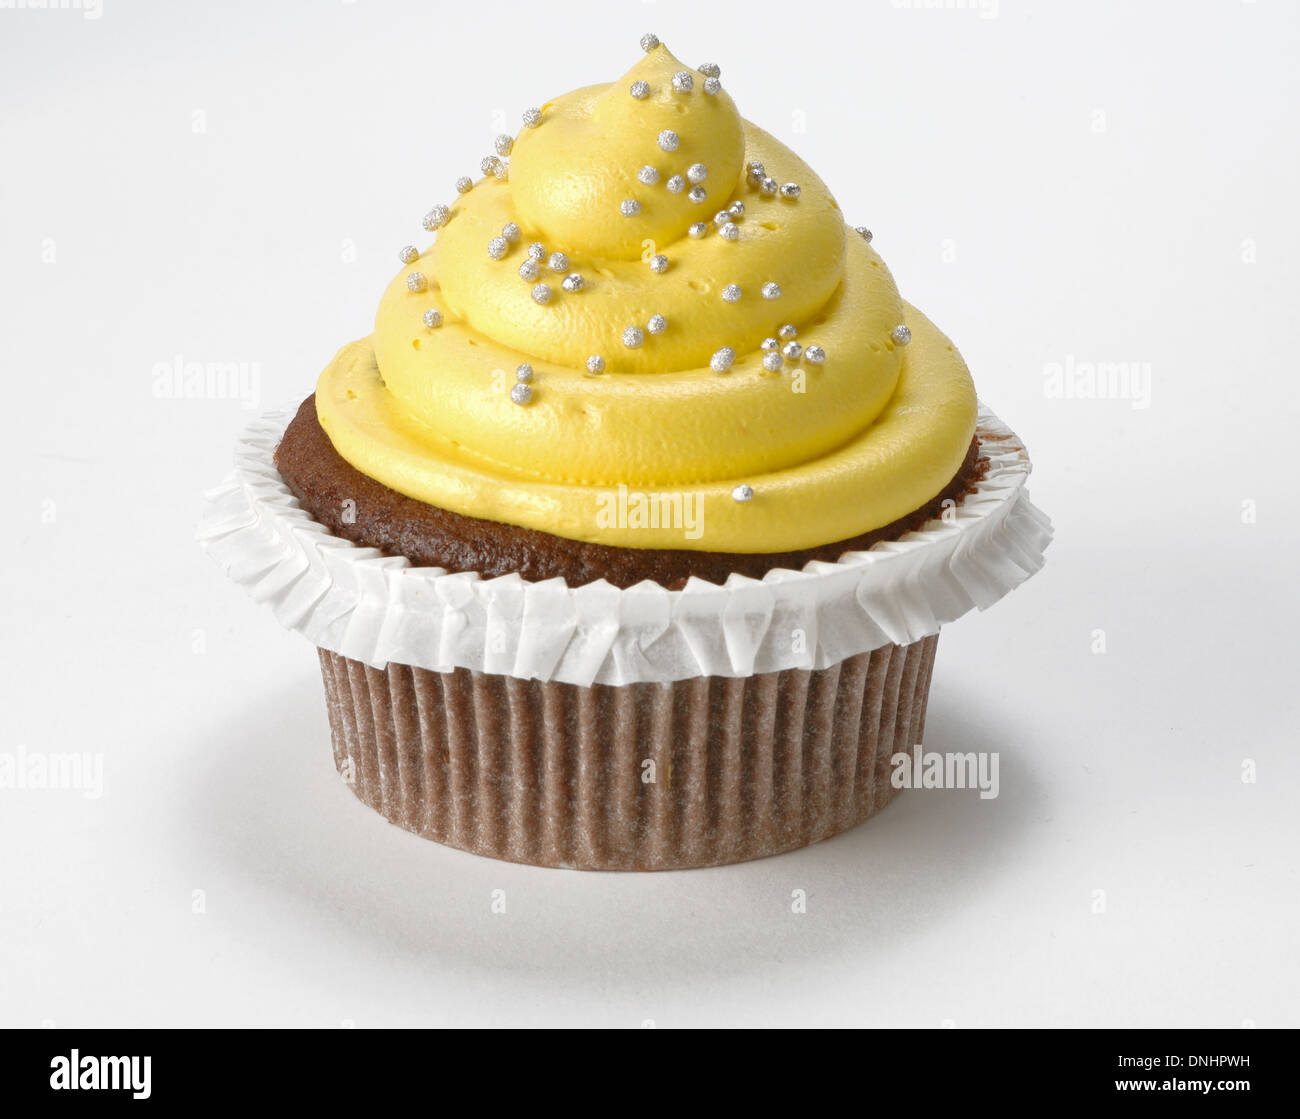 A single decorated yellow cupcake on a white background. Stock Photo